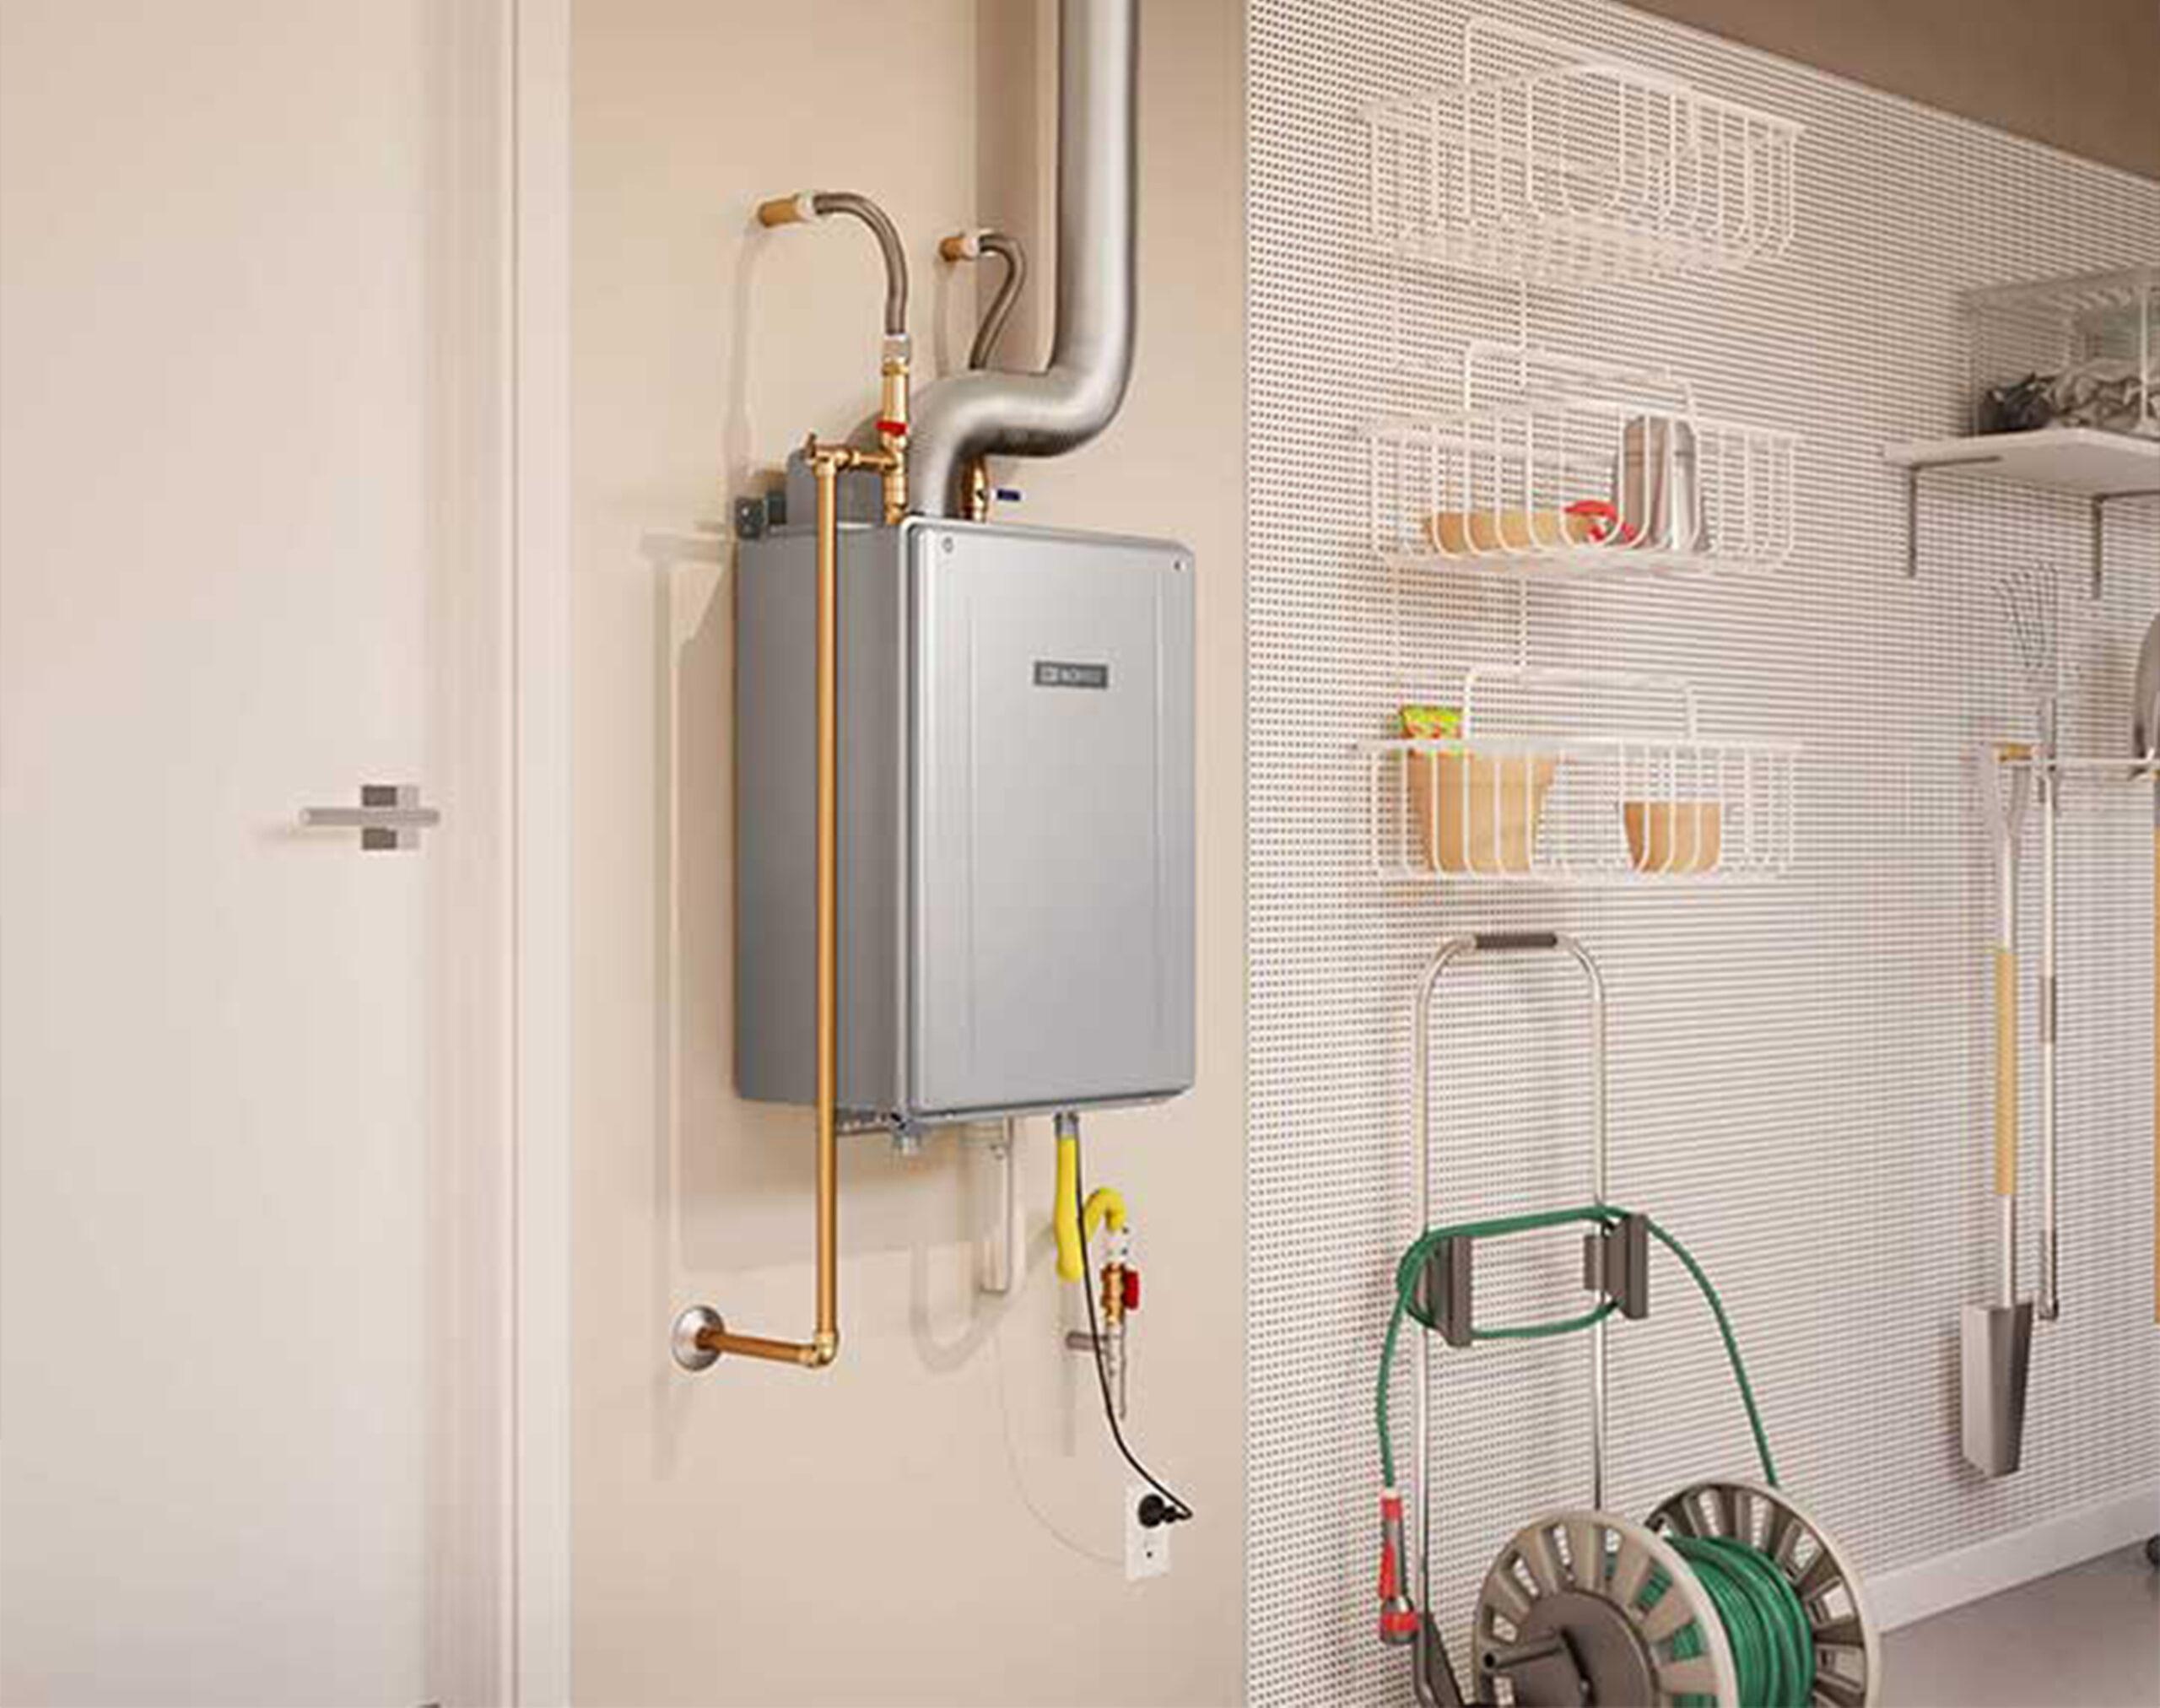 Tankless hot water heater installed